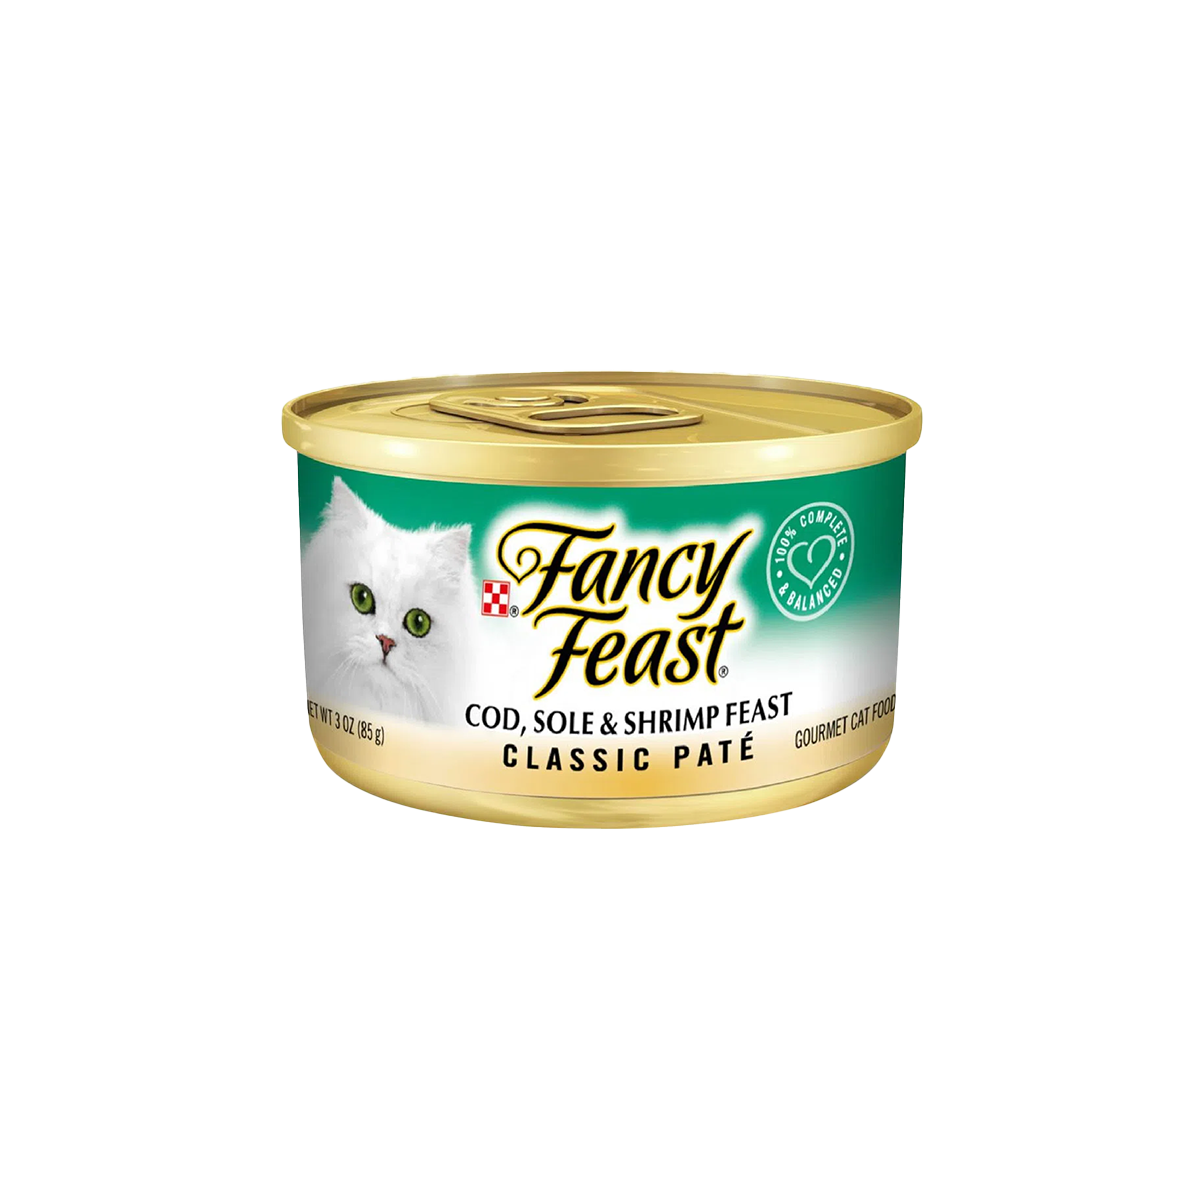 Purina-FancyFeast-cod-sode-and-shrimp-feast.png